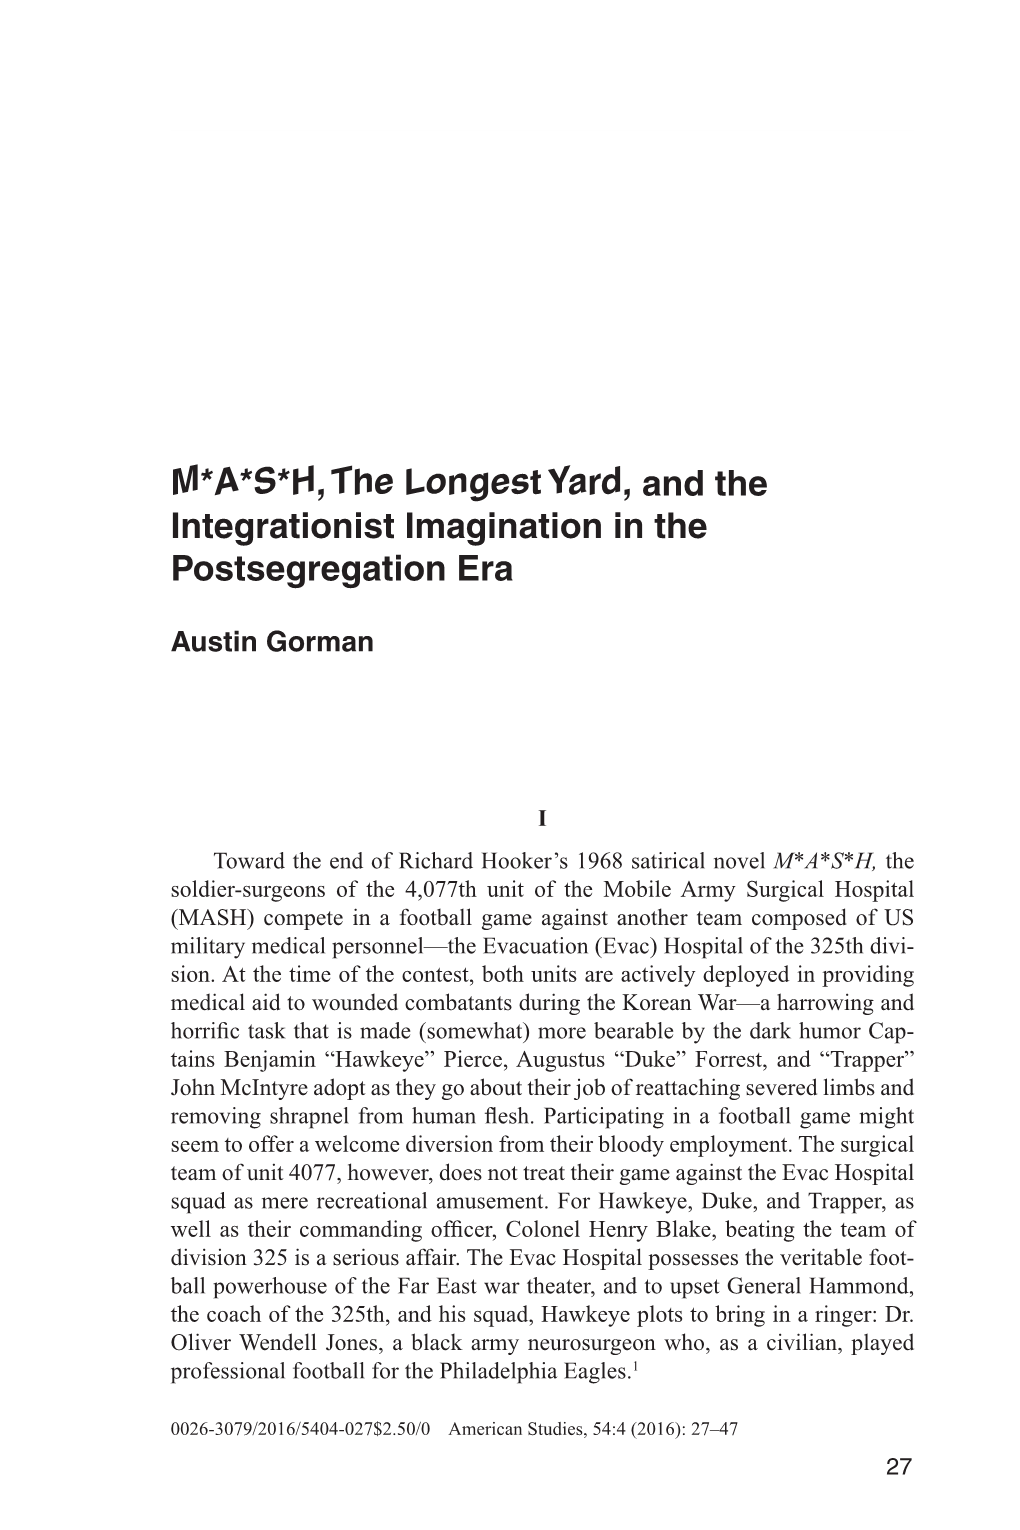 M*A*S*H, the Longest Yard, and the Integrationist Imagination in the Postsegregation Era